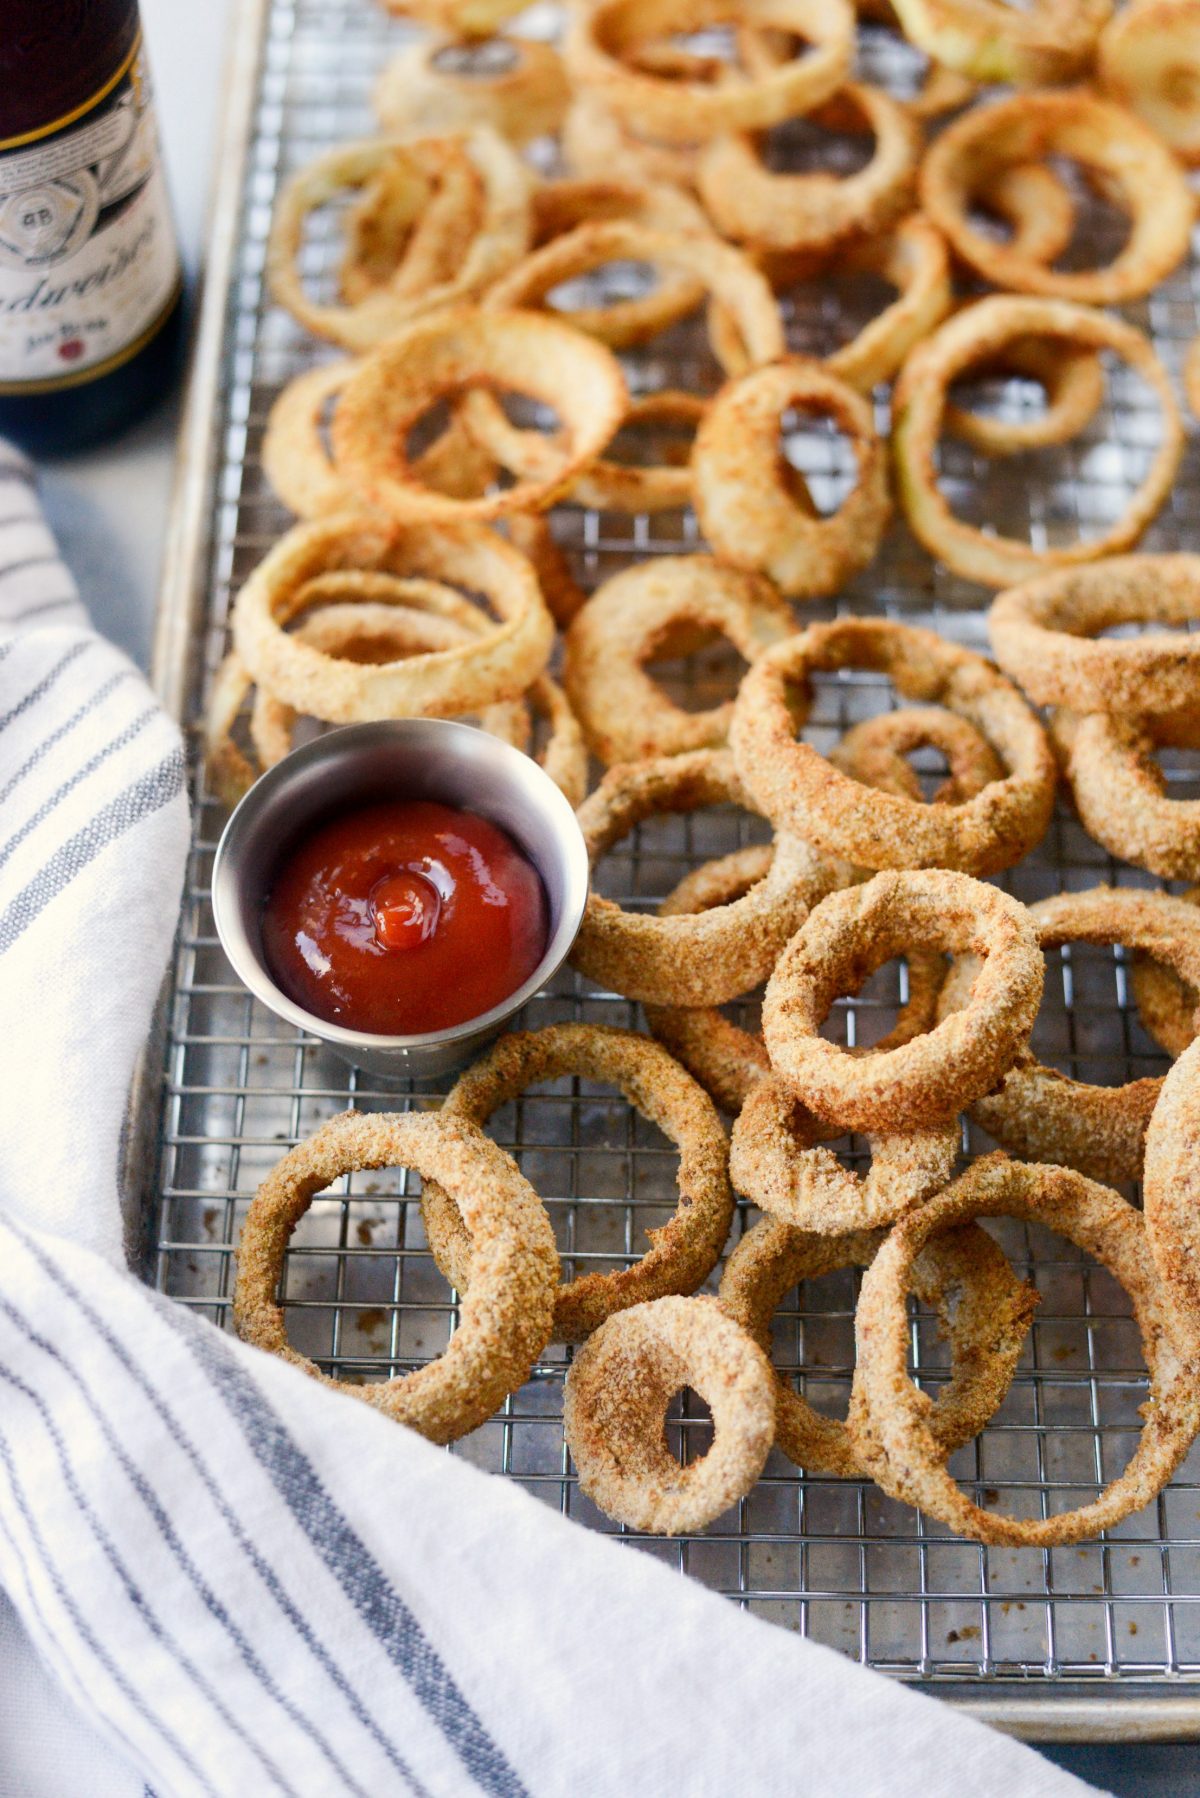 https://www.simplyscratch.com/wp-content/uploads/2018/10/Air-Fryer-Beer-Battered-Onion-Rings-l-SimplyScratch.com-23-1200x1798.jpg